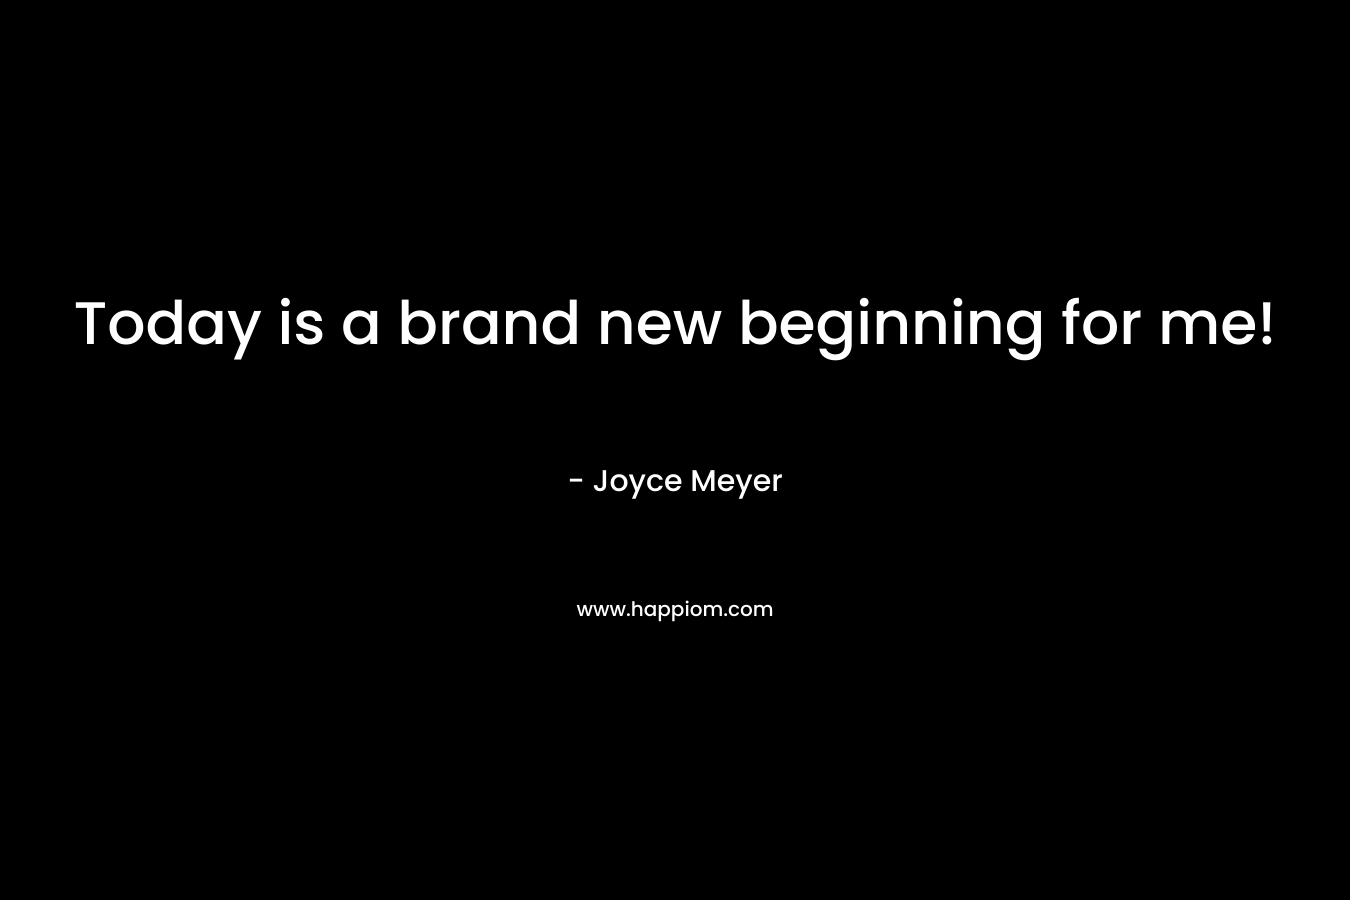 Today is a brand new beginning for me!